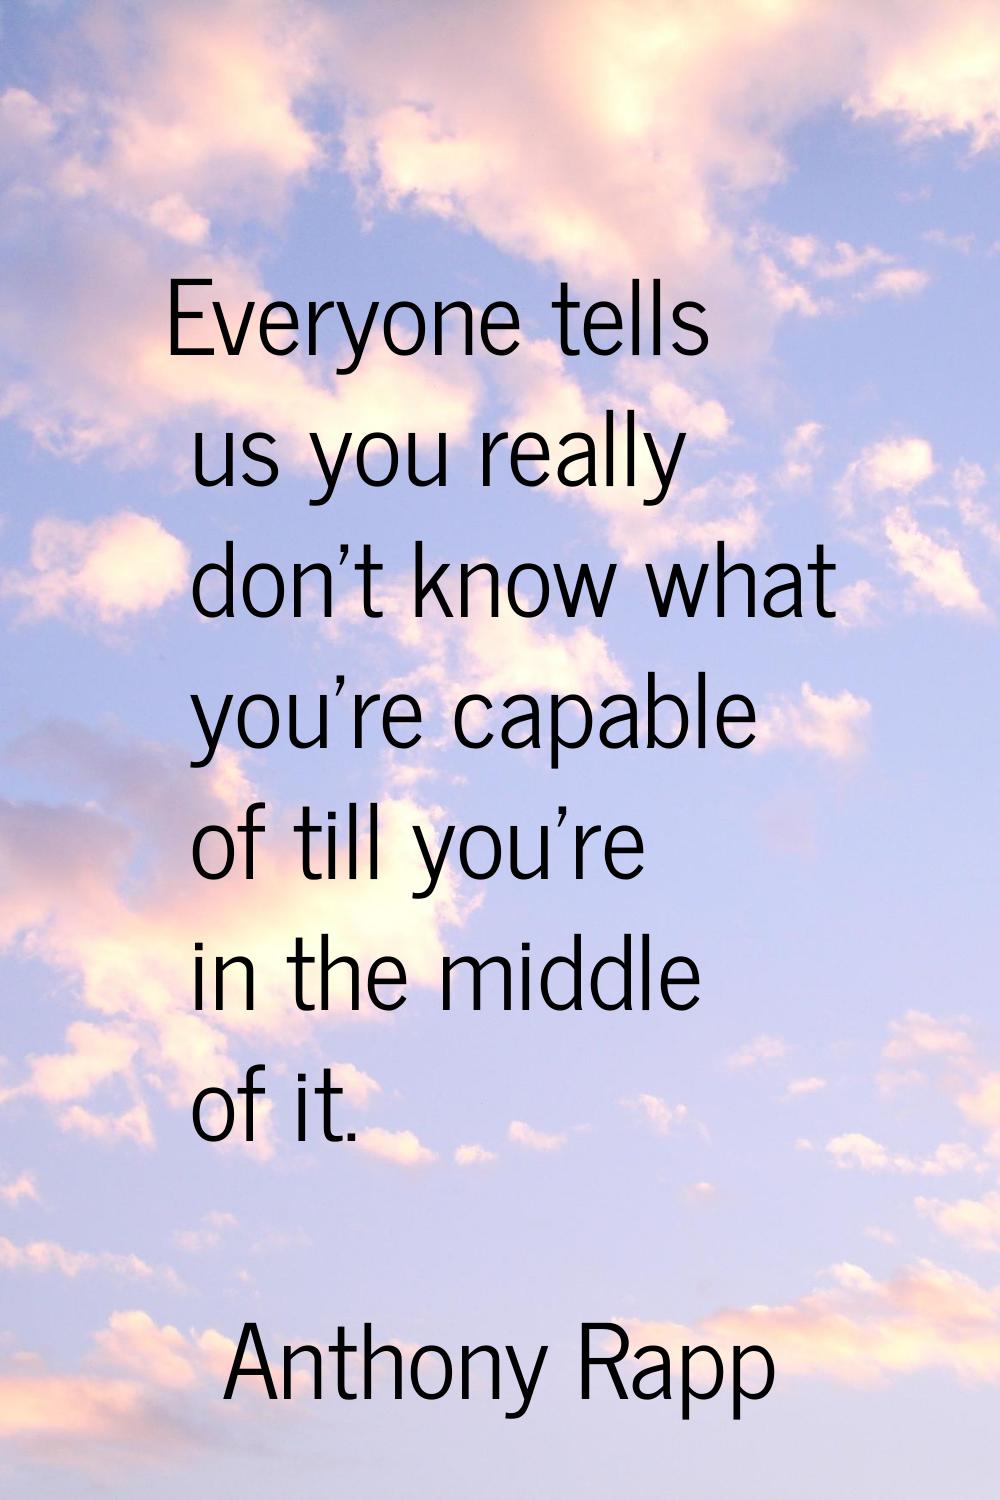 Everyone tells us you really don't know what you're capable of till you're in the middle of it.